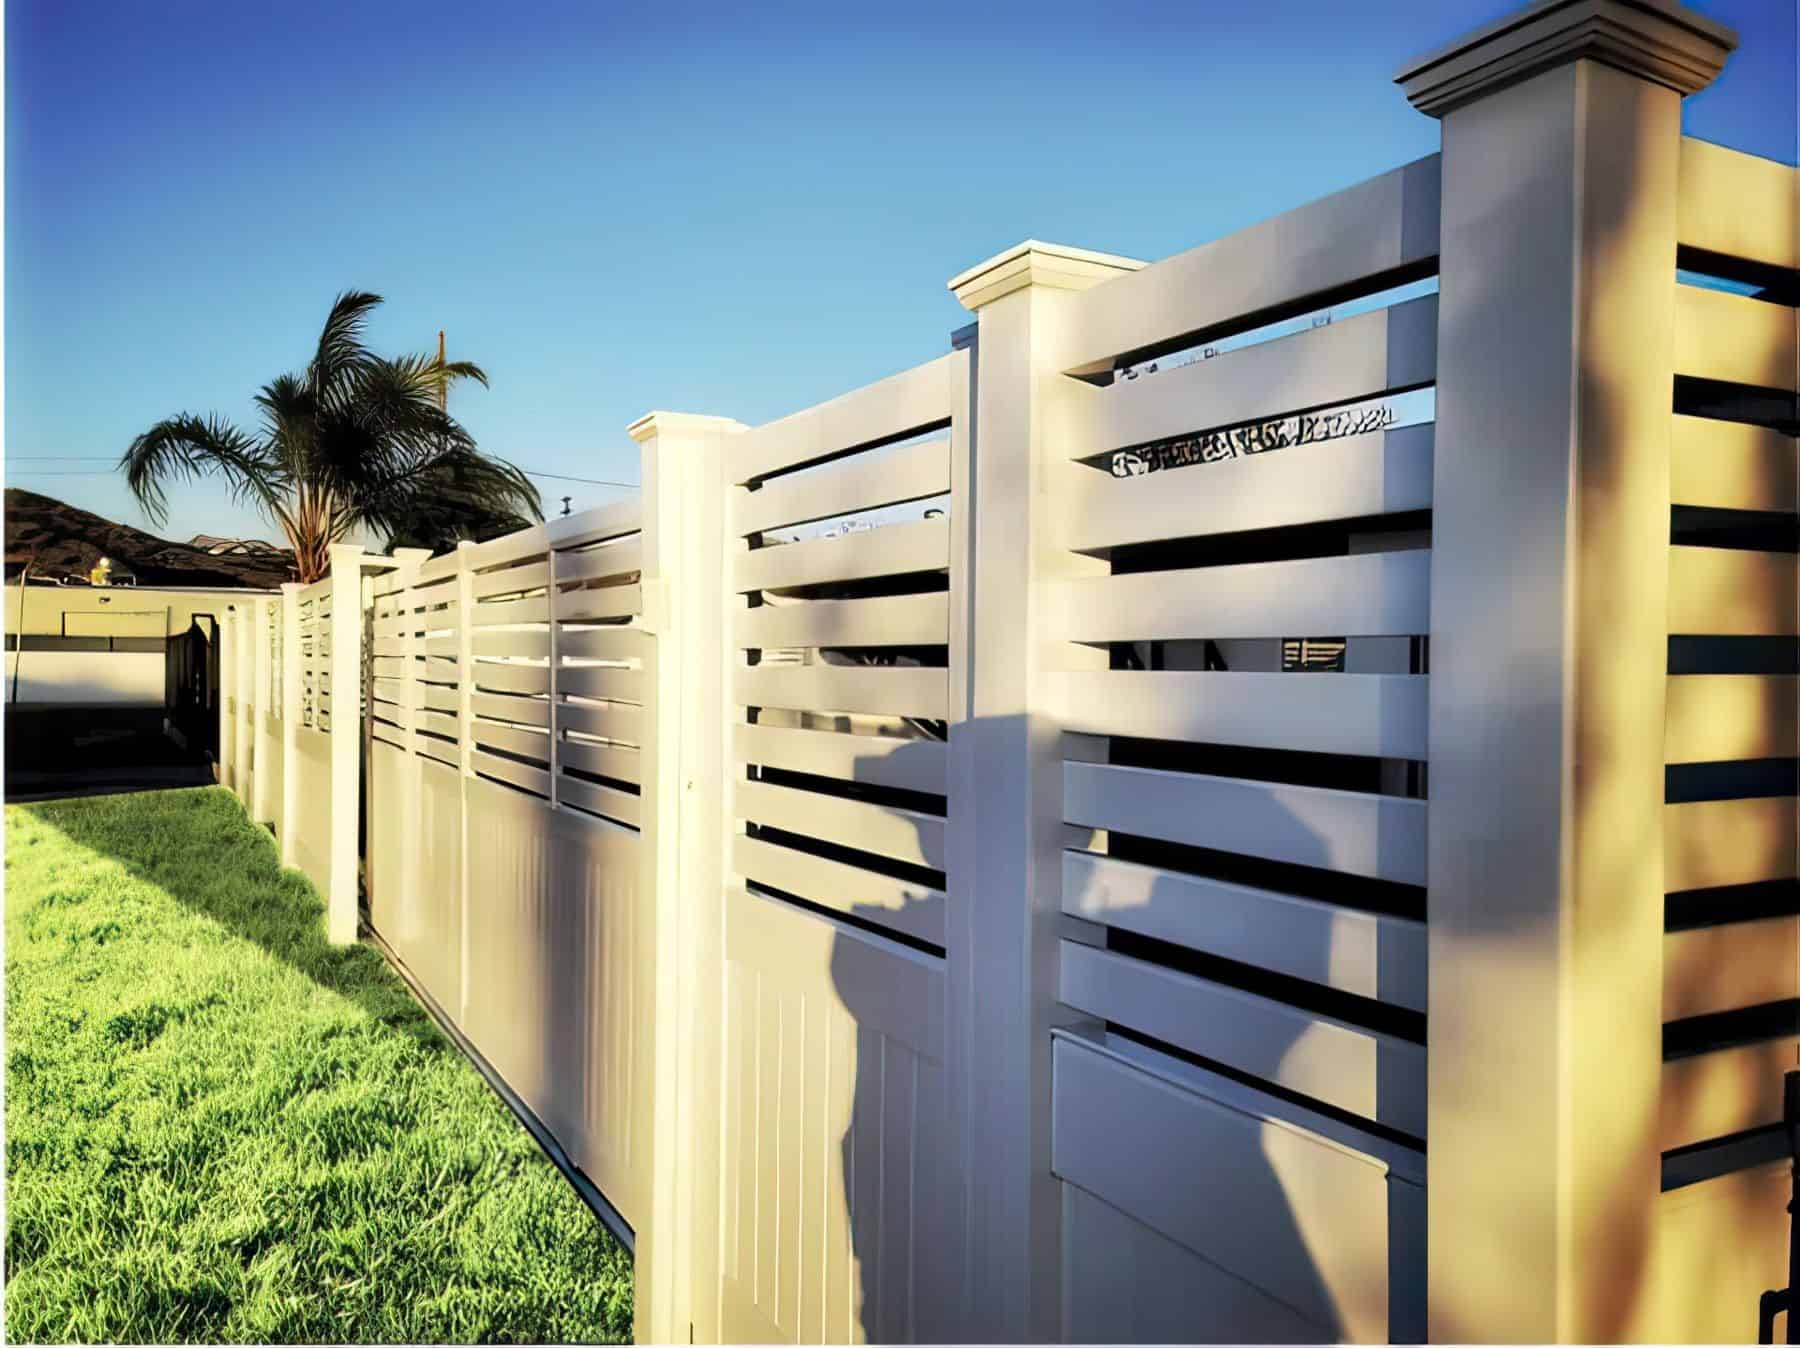 Vinyl privacy and picket fence with horizontal slats as a boundary around backyard featuring a lush green lawn.